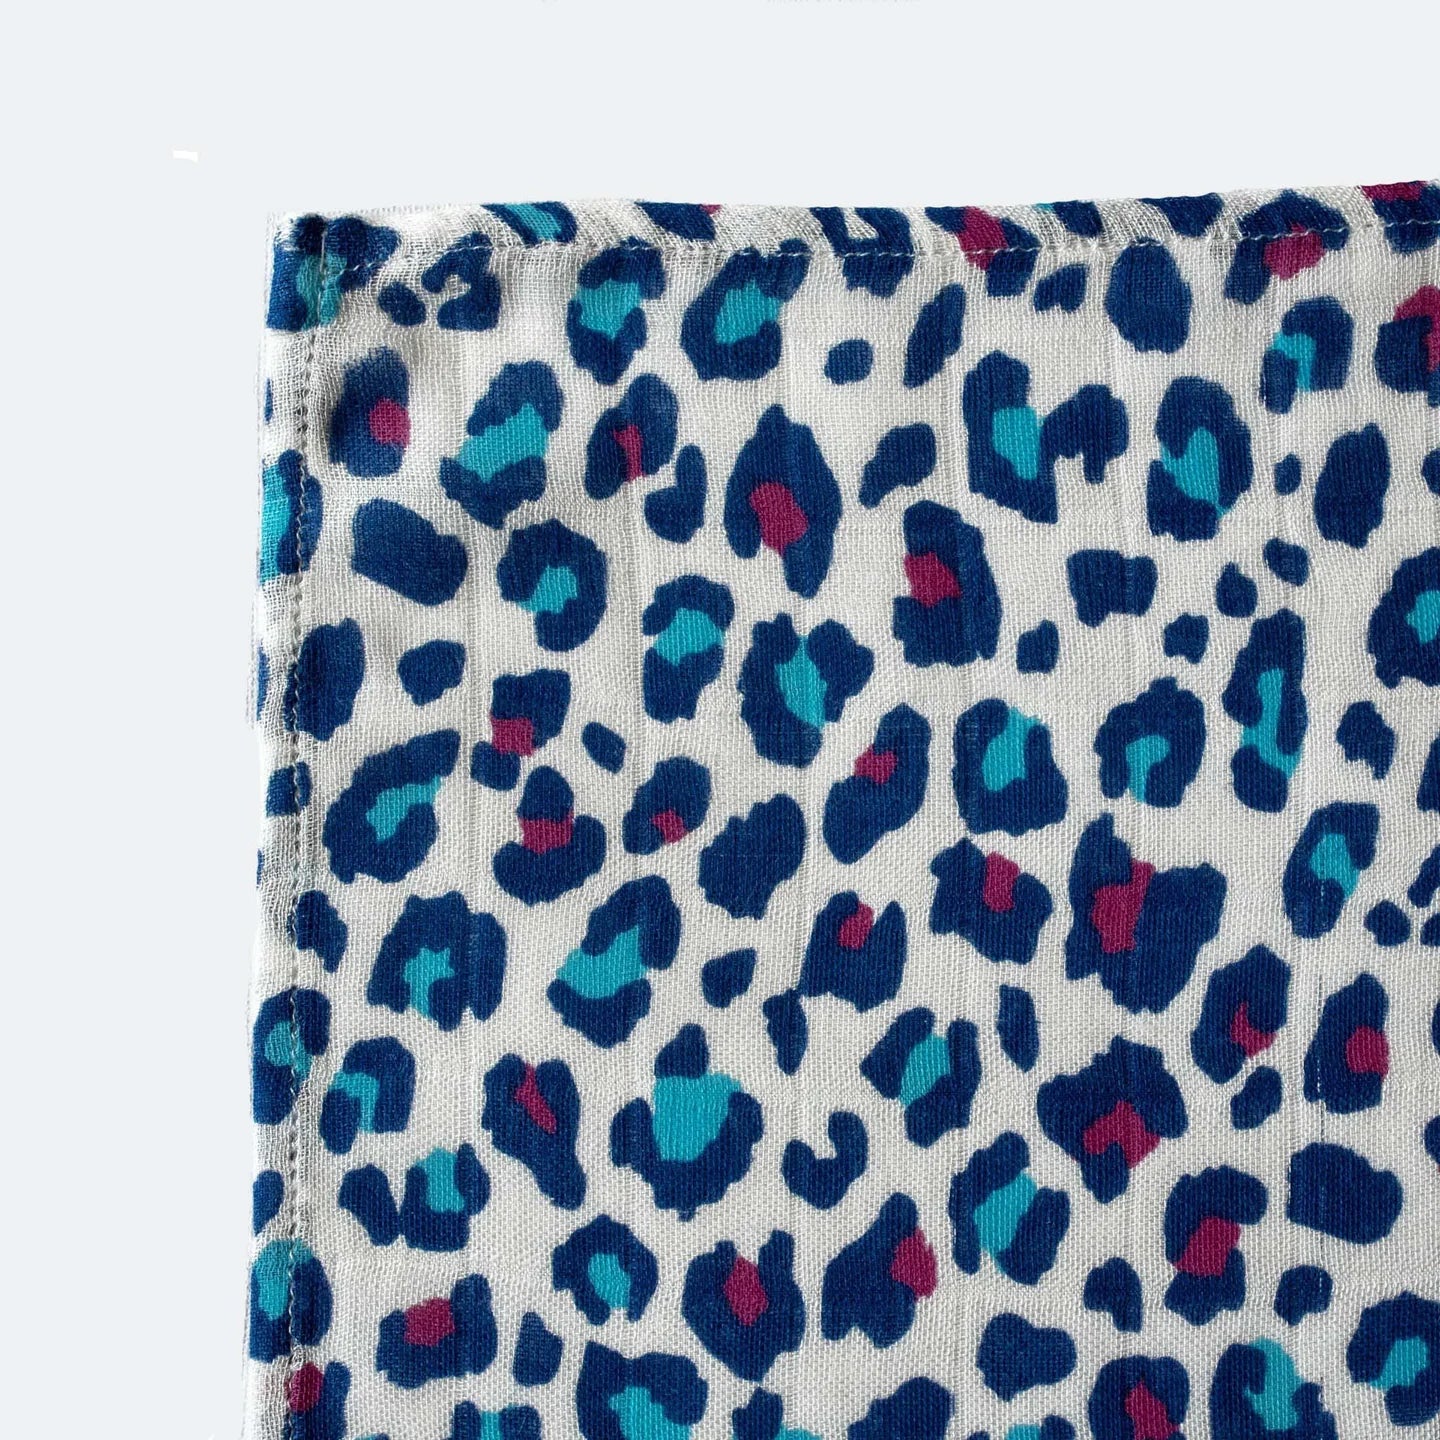 LEOPARD PRINT MUSLIN 3-PACK - for 5+ month old babies | BY ETTA LOVES